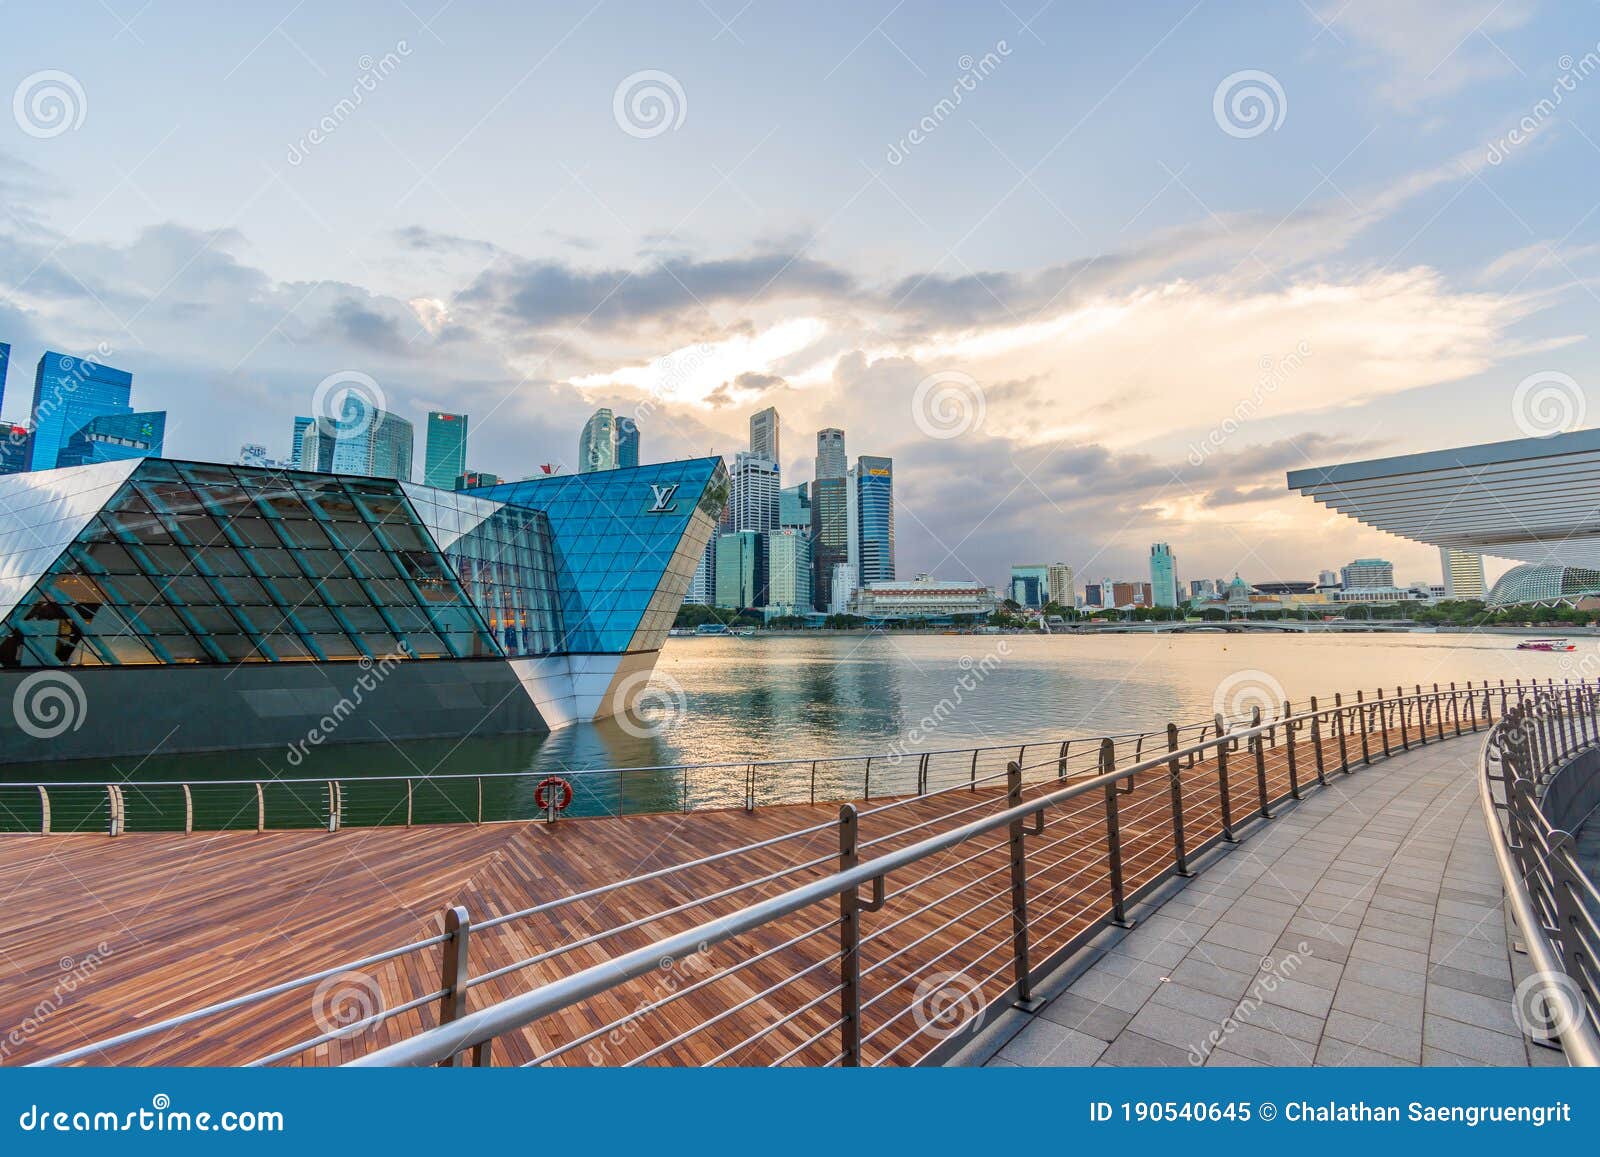 The Futuristic Building Of Louis Vuitton Shop In Marina Bay, Singapore  Stock Photo, Picture and Royalty Free Image. Image 43751821.